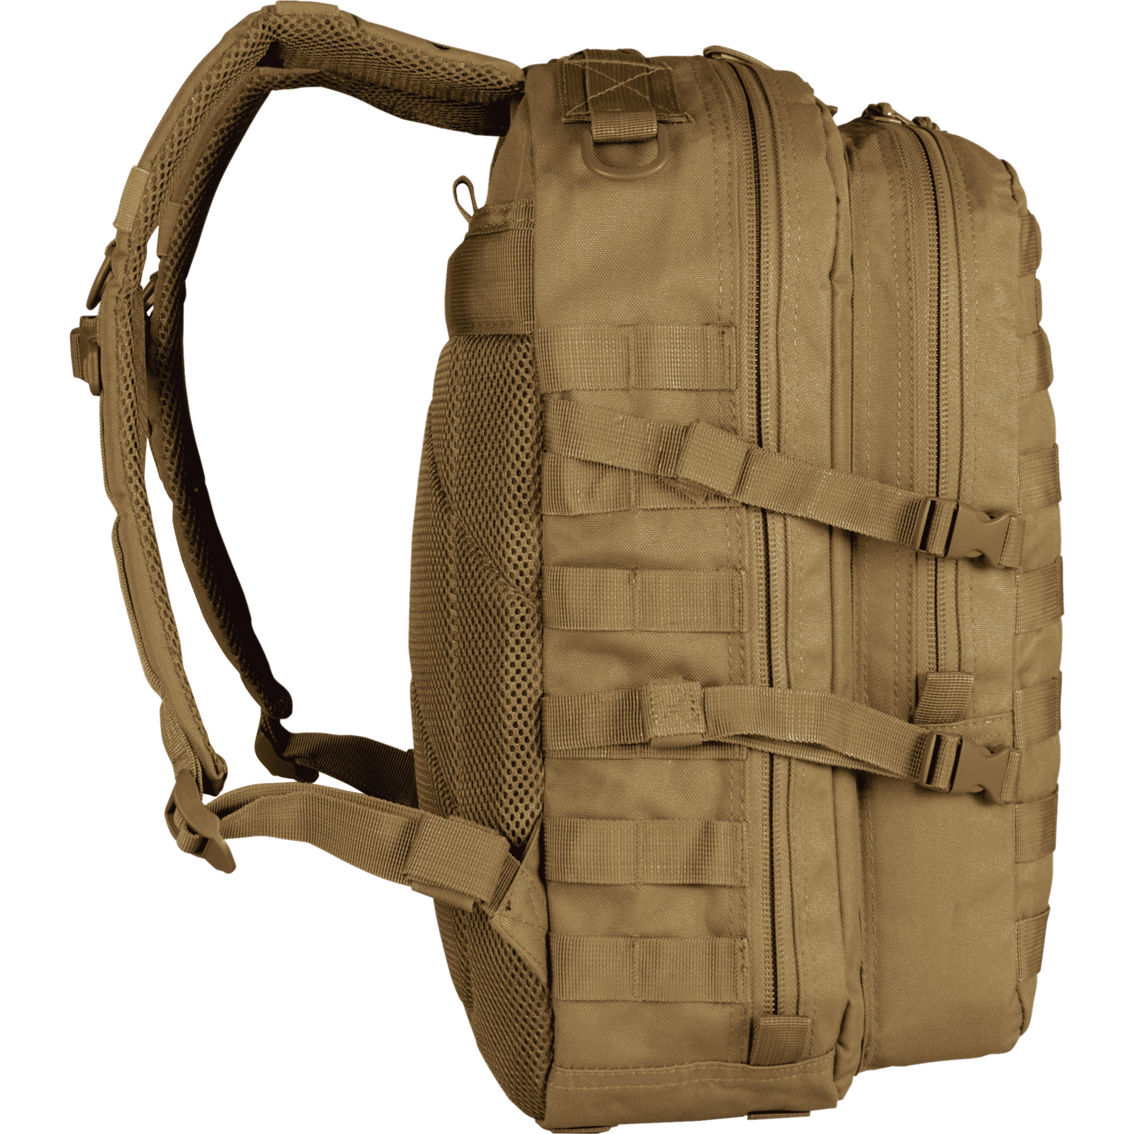 Red Rock Outdoor Gear Element Daypack - Image 4 of 8